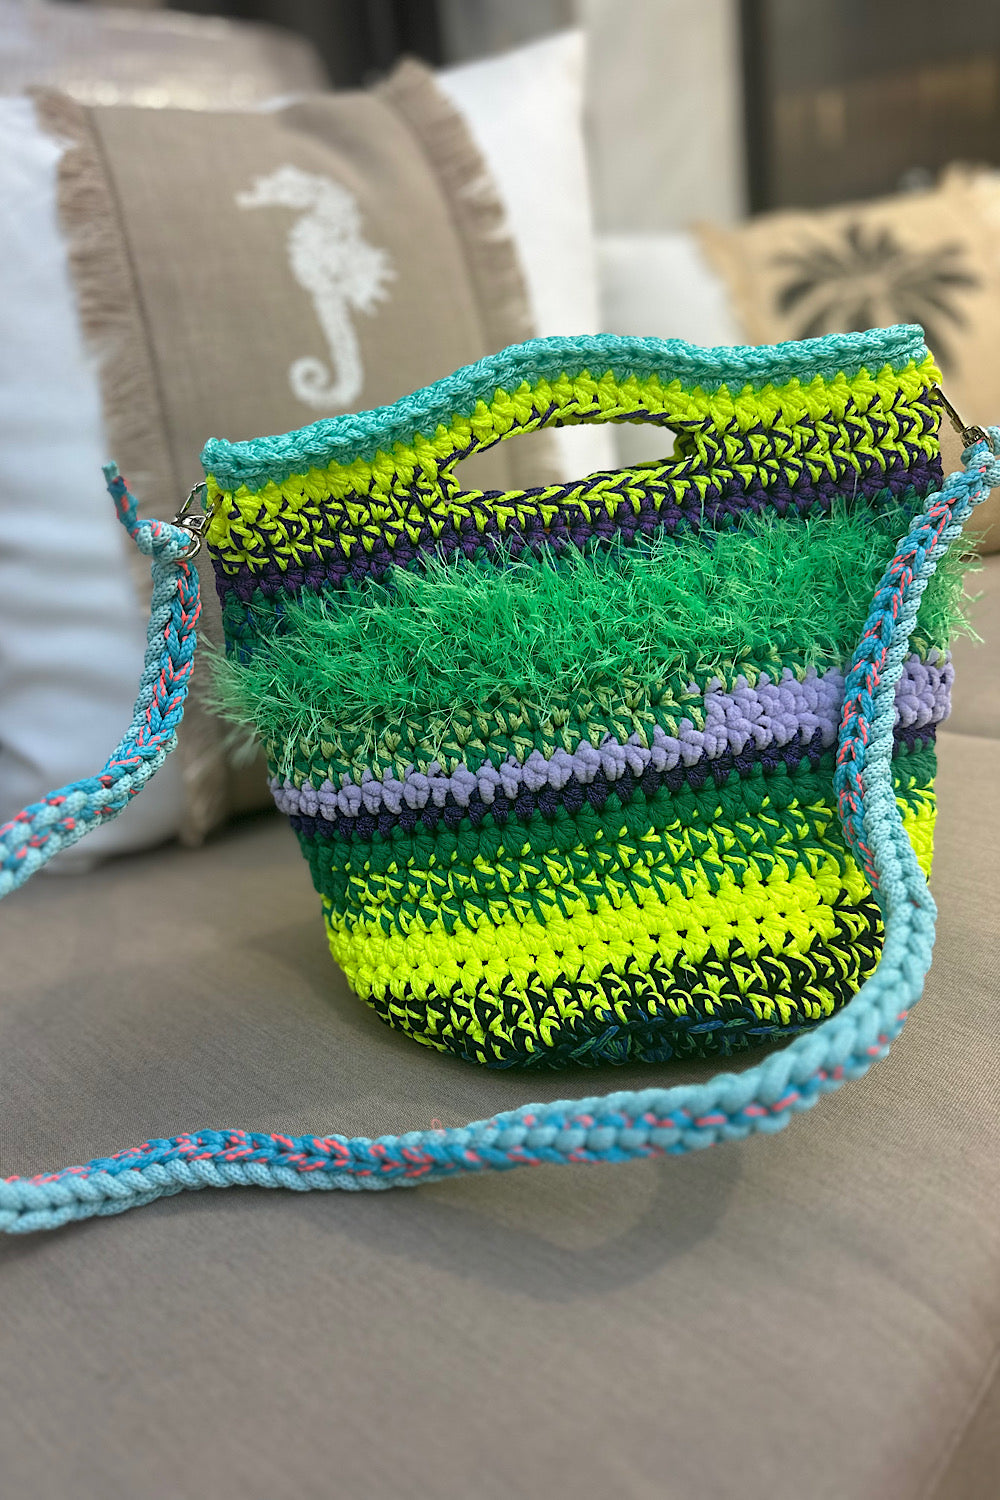 HAND CRAFTED CROCHET KNIT BAG